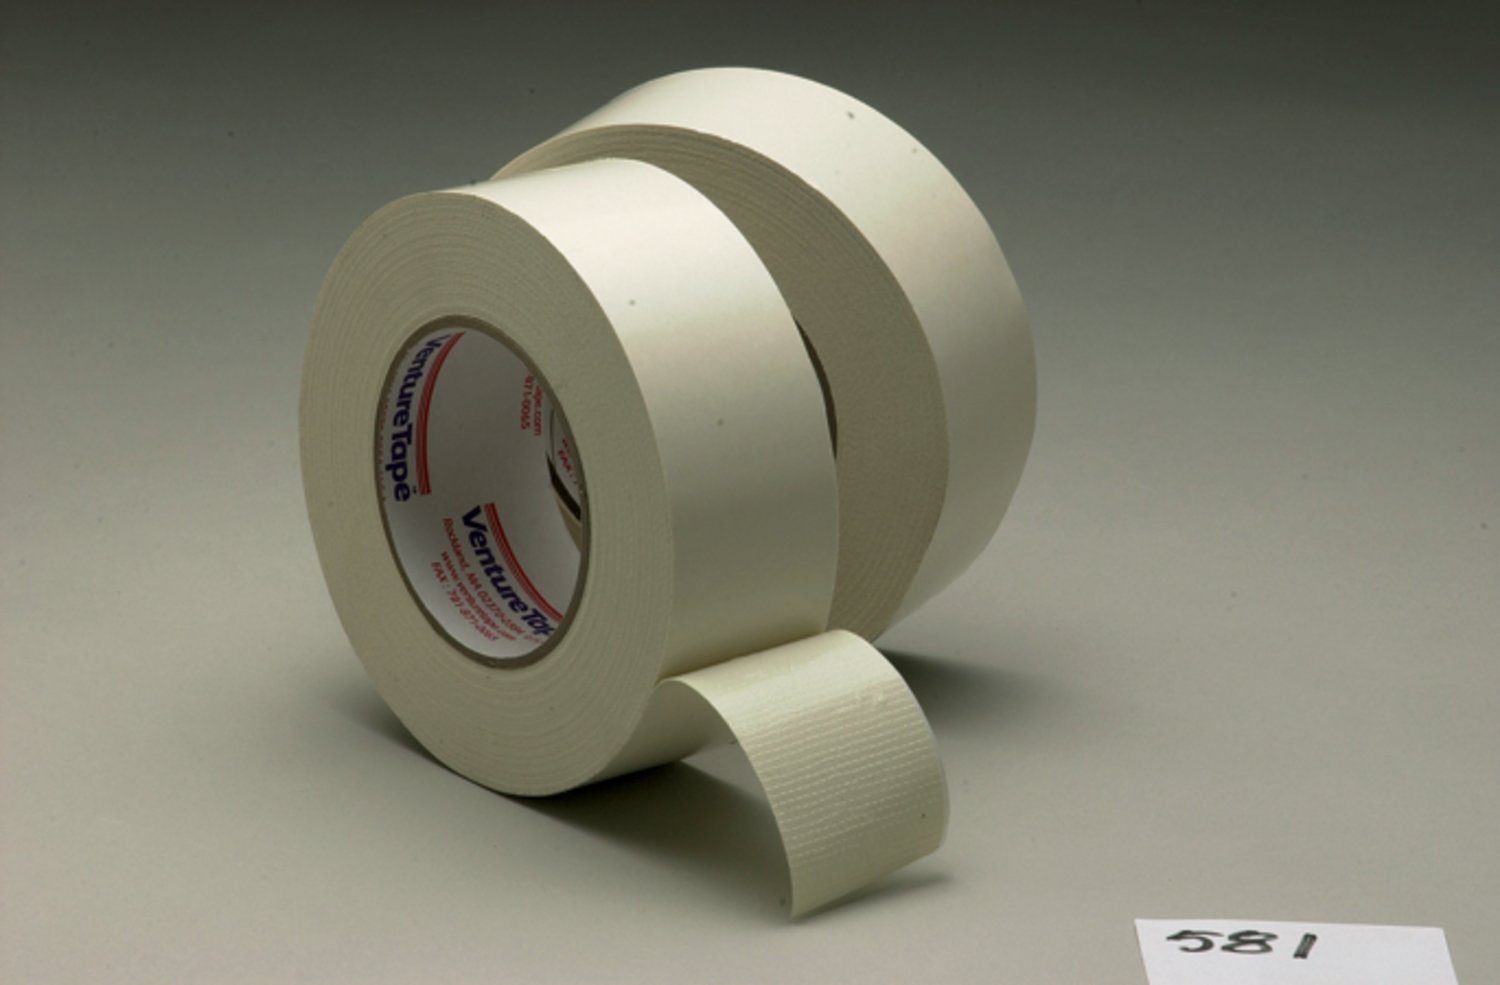 7010378769 - 3M Venture Tape Double Coated Cloth Tape 581, White, 1 3/4 in x 25 yd,
24 rolls per case